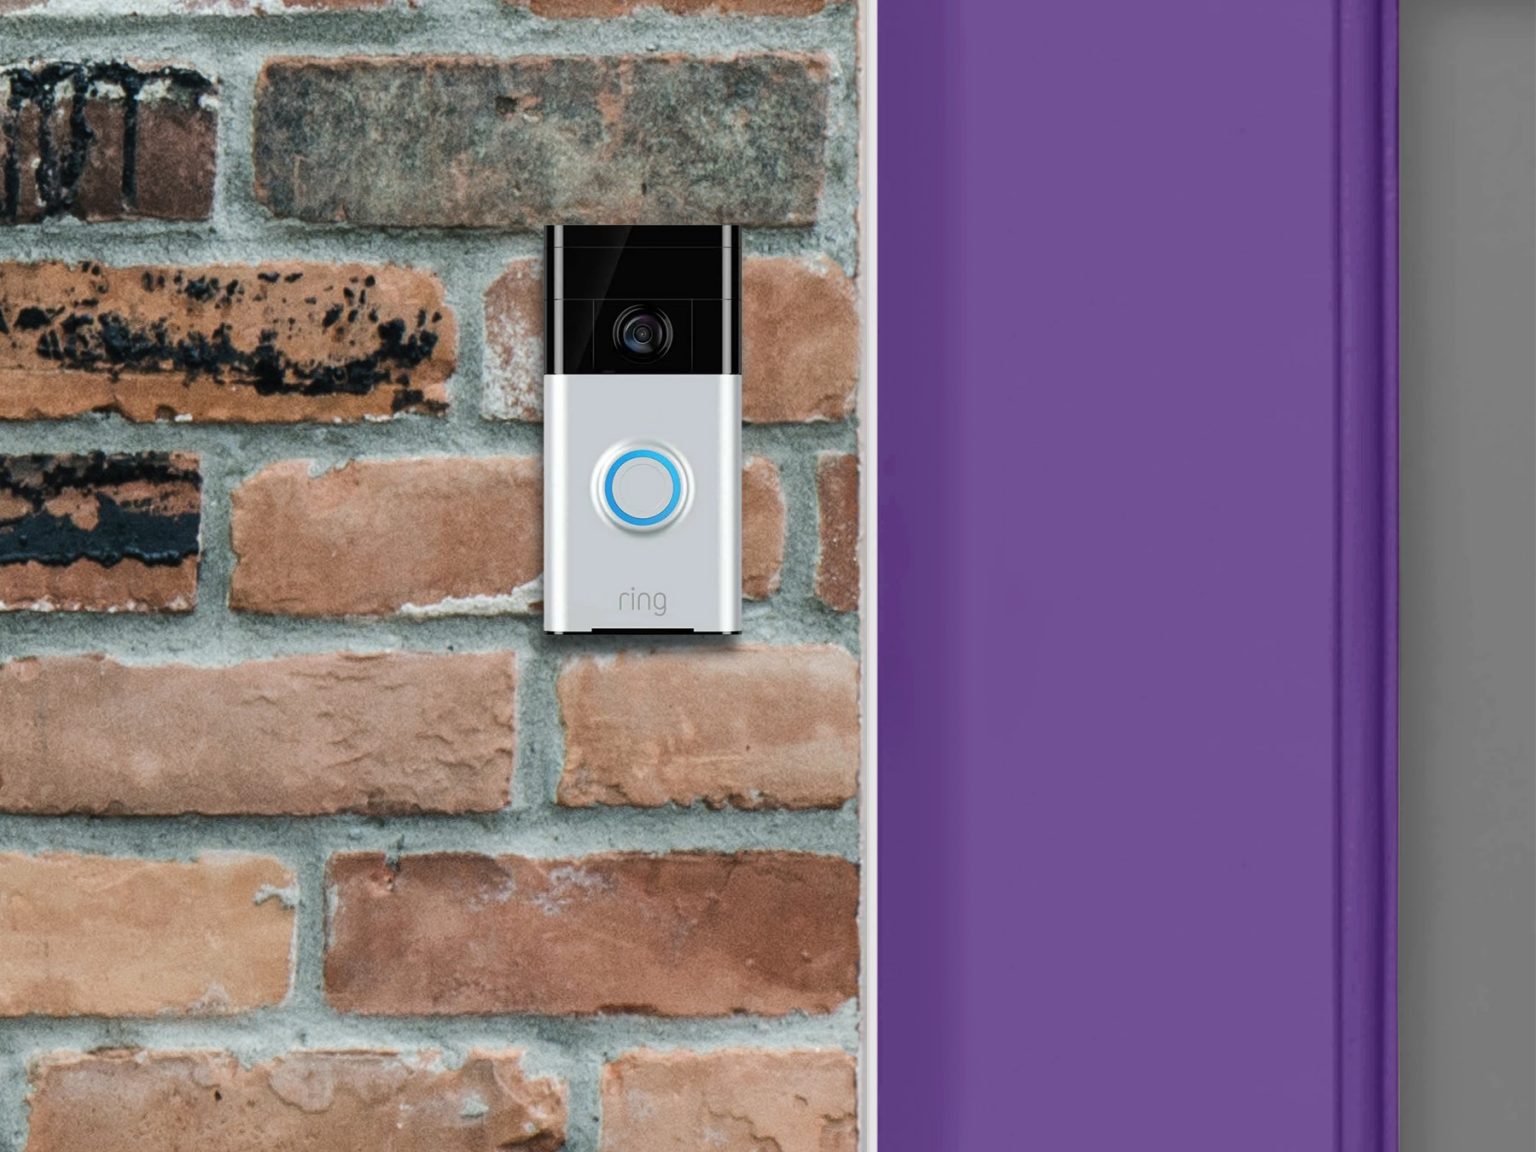 Can You Install Ring Doorbell Without Drilling?